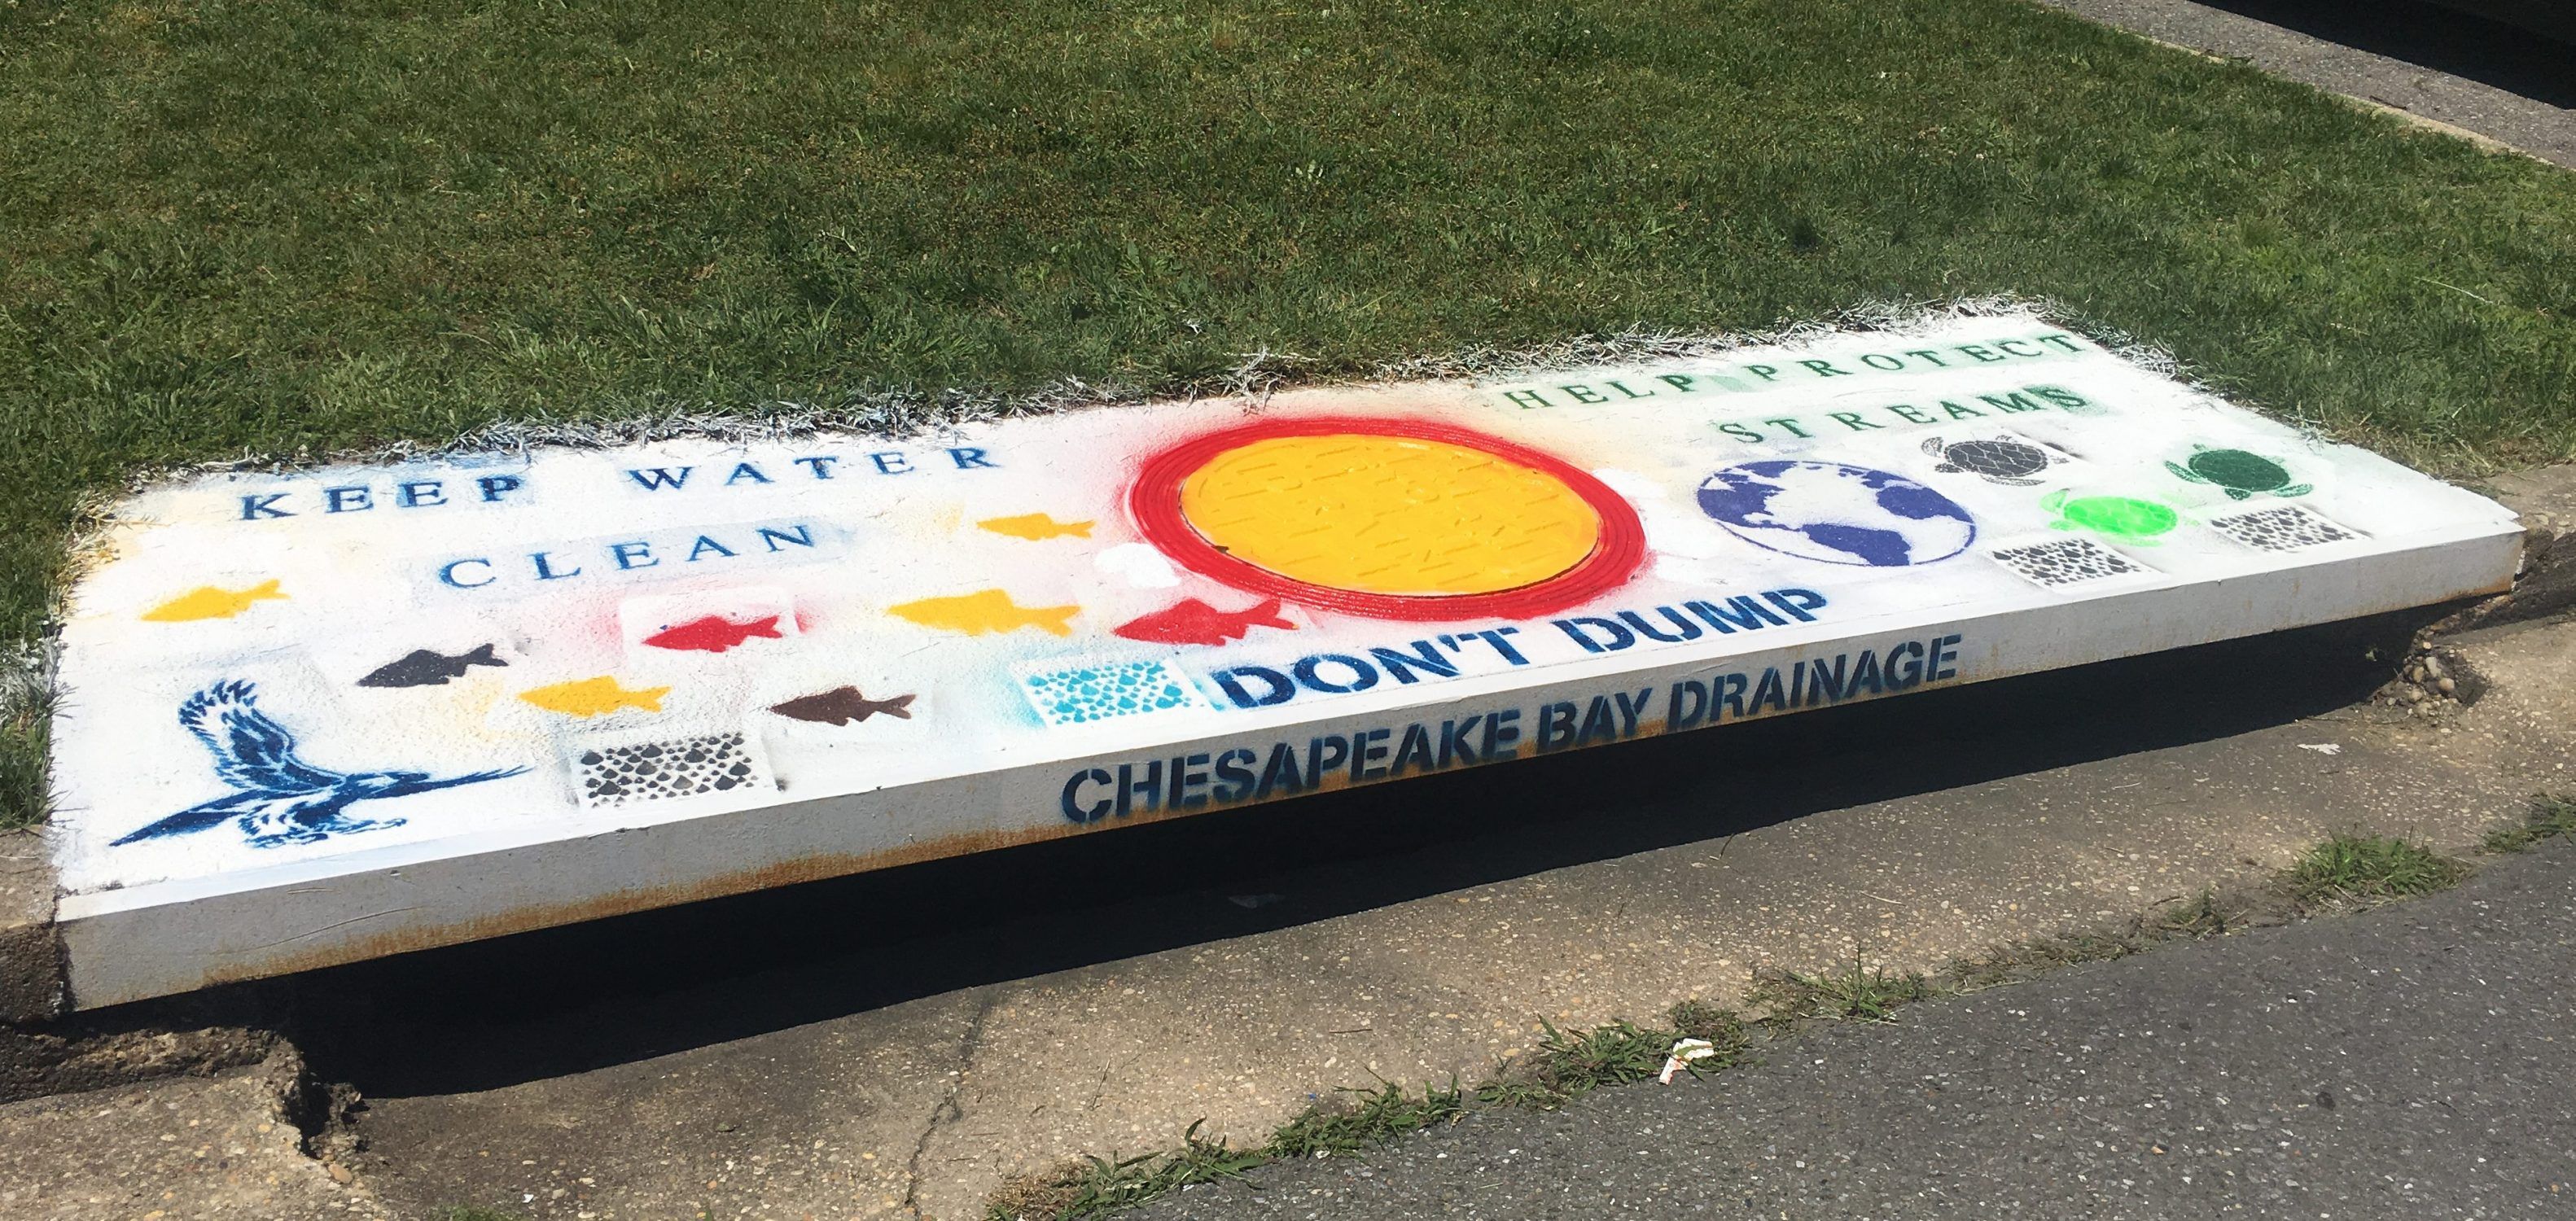 Image of a stormwater drain with stenciling art that says "Don't Dump" and "Chesapeake Bay Drainage".